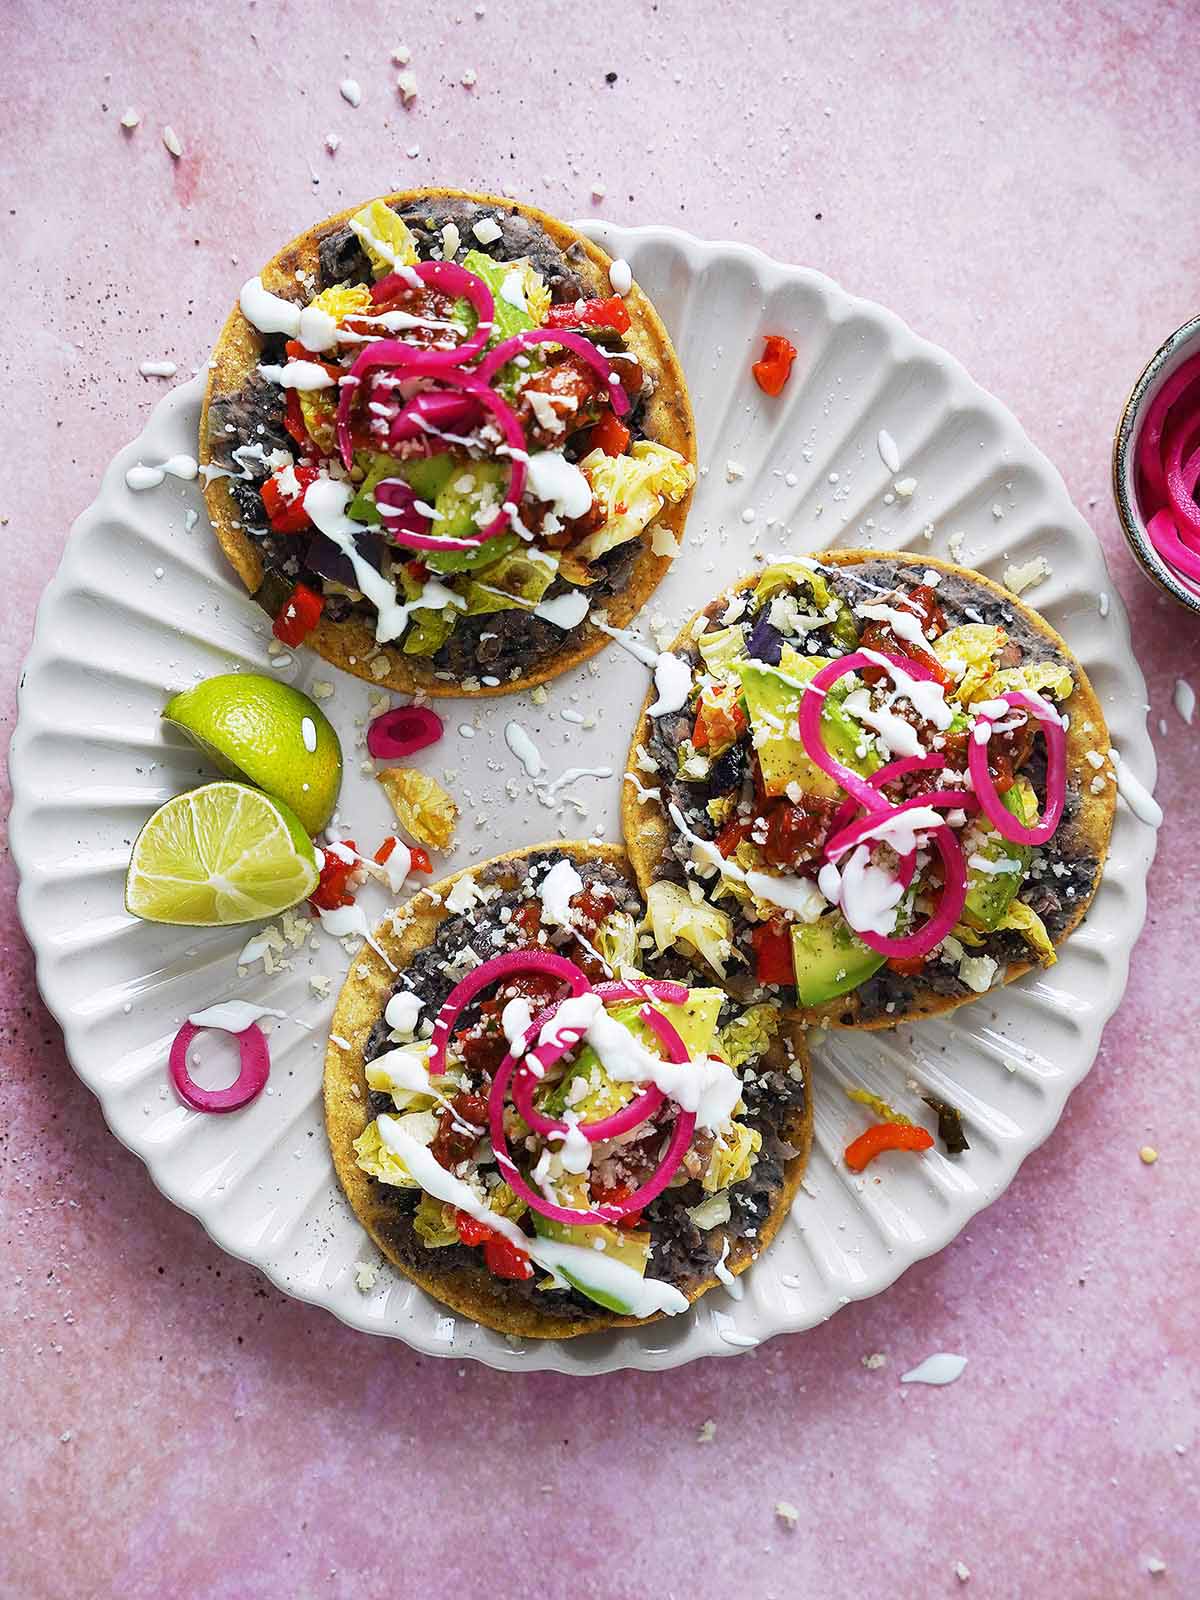 Three black bean tostadas topped with veggies and cheese on a plate.